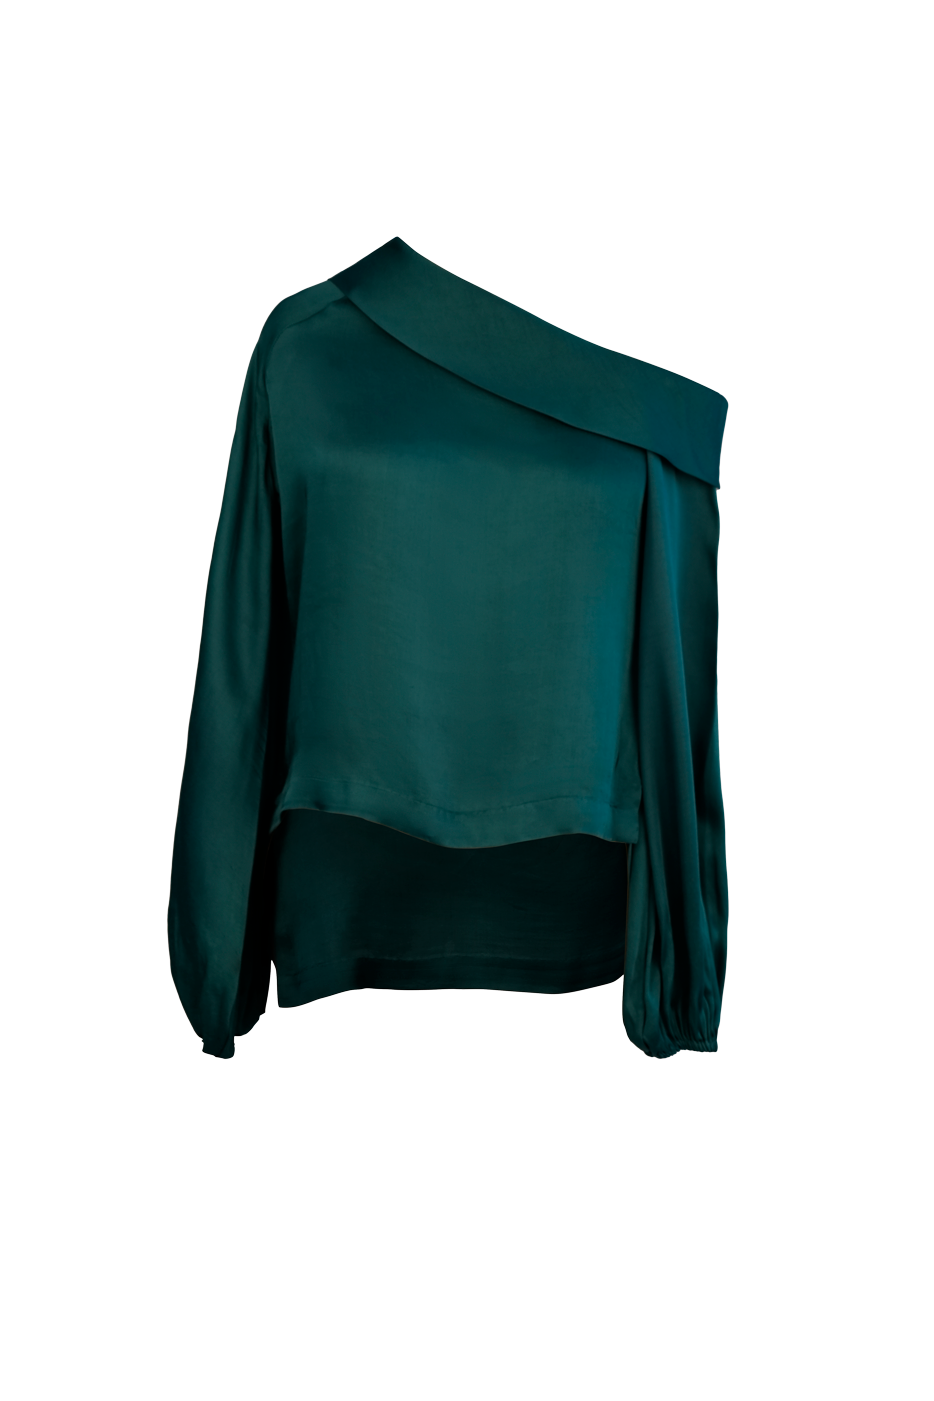 Gatsby Blouse in Emerald